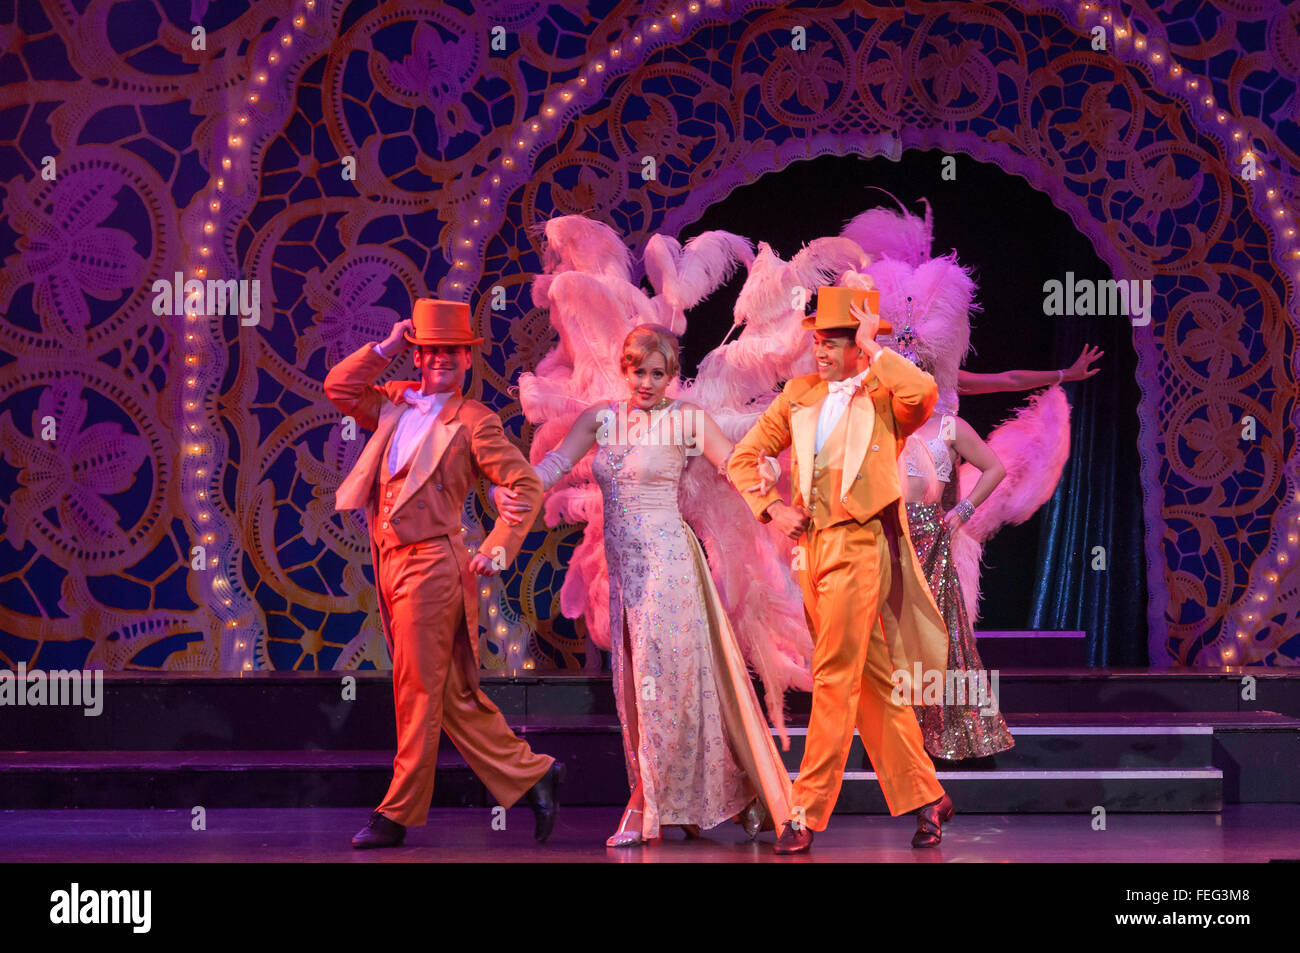 Showtime in Pacifica Theatre, Royal Caribbean's Brilliance of the Seas cruise ship, North Sea, Europe Stock Photo